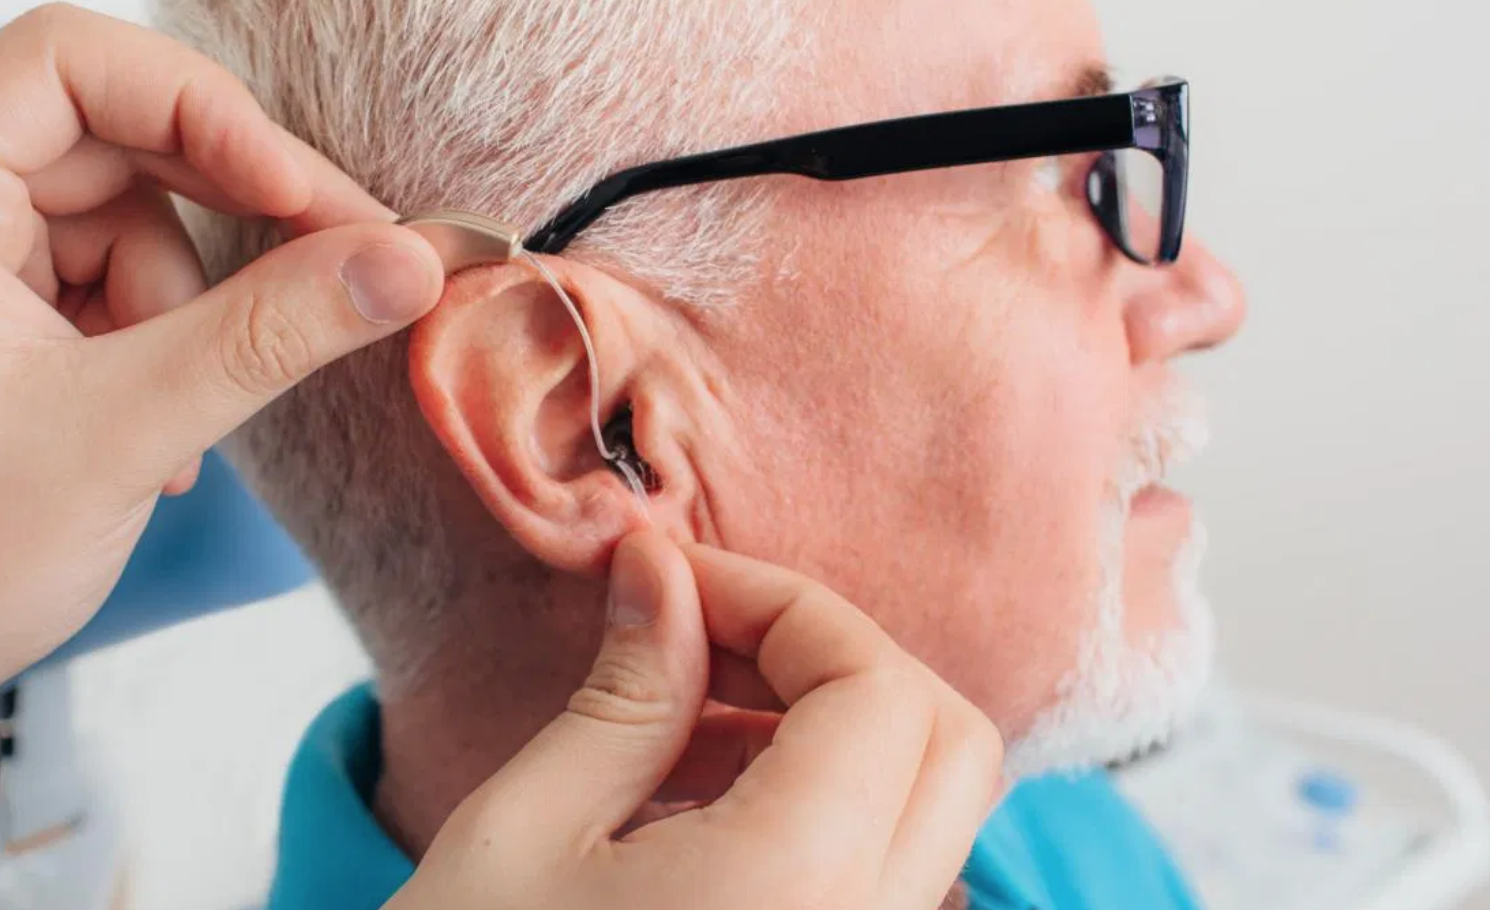 Man getting fitted with hearing aid